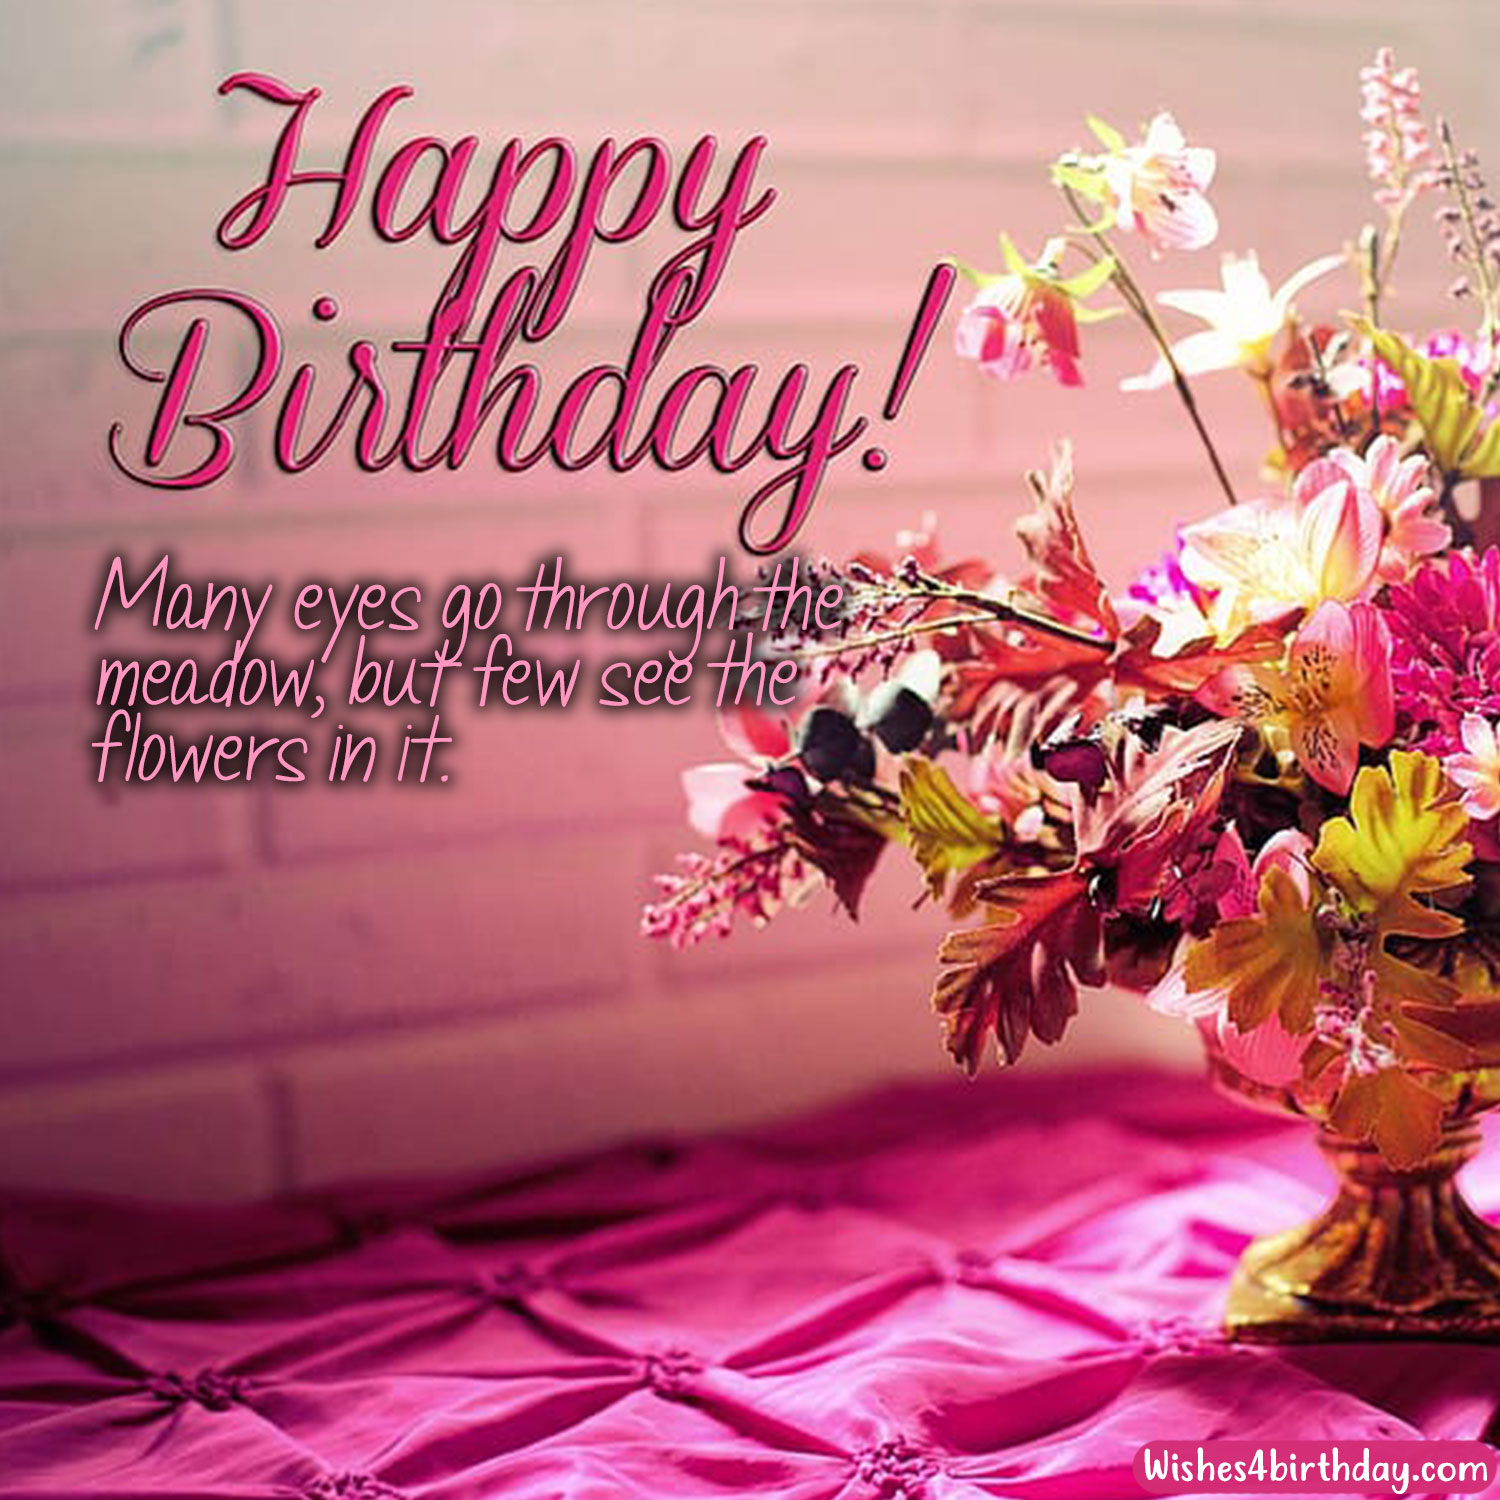 Birthday party birthday flower gifts for her - Happy Birthday Wishes, Memes, ...